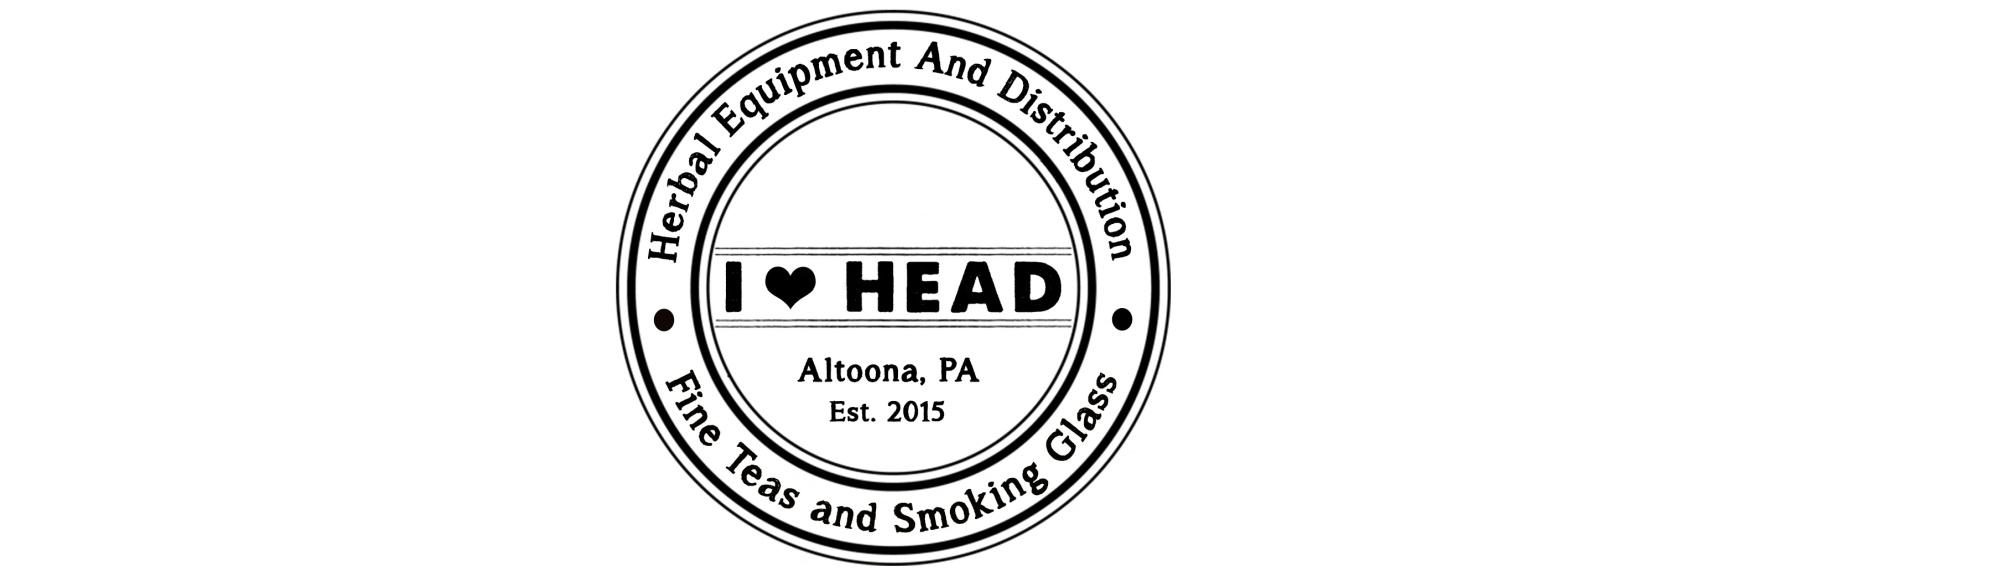 image of herbal equipment and distribution in altoona pa